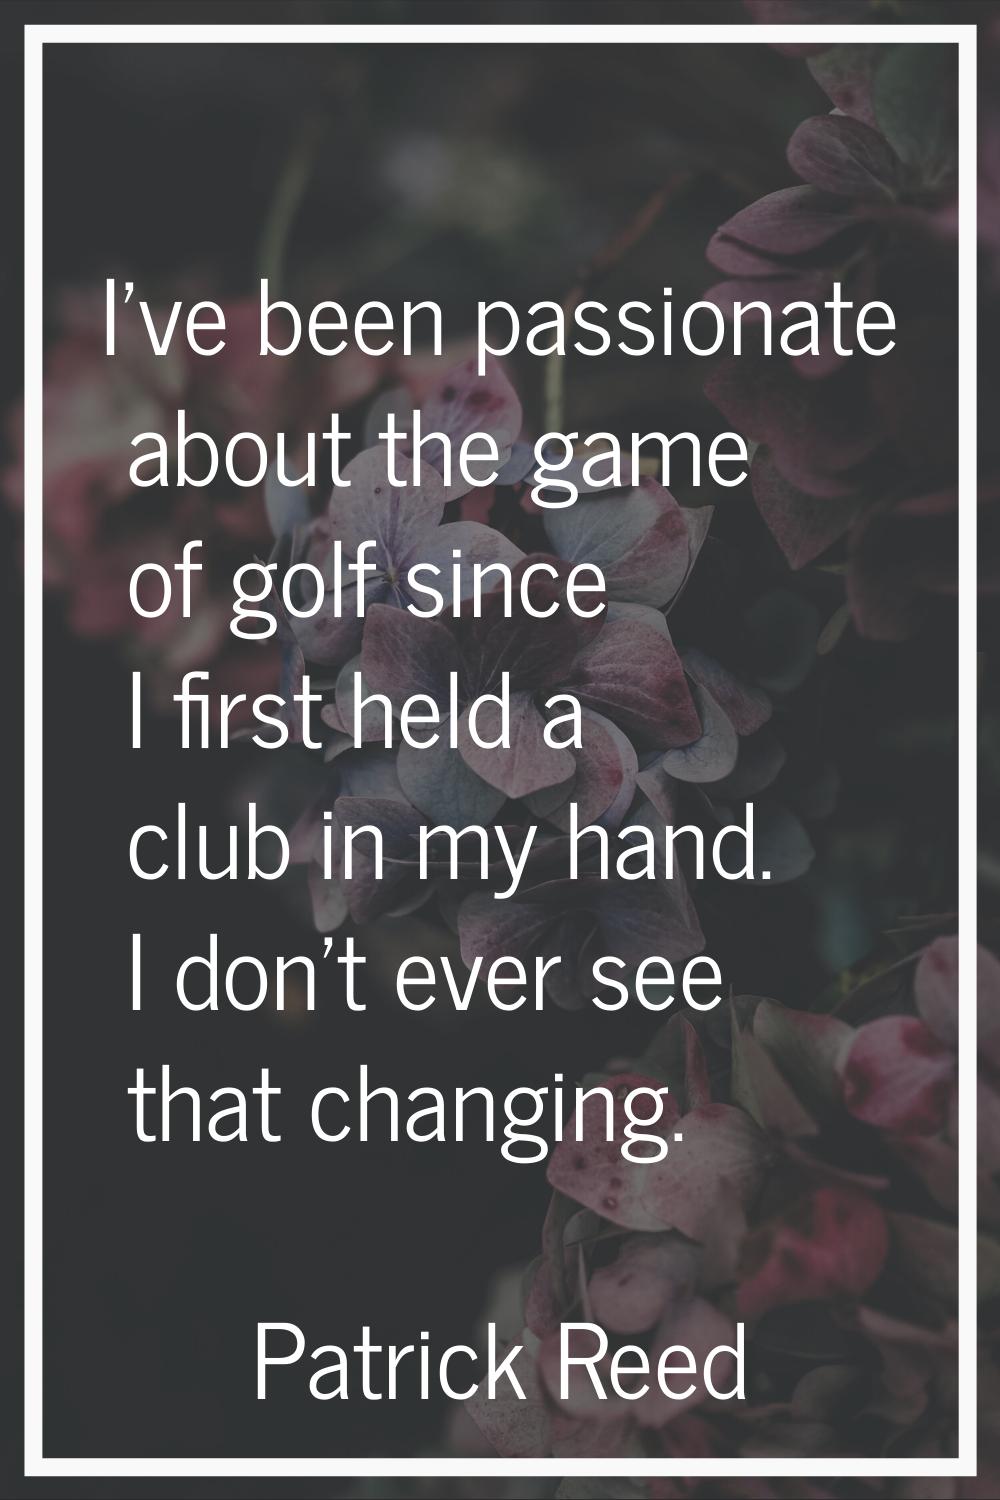 I’ve been passionate about the game of golf since I first held a club in my hand. I don’t ever see 